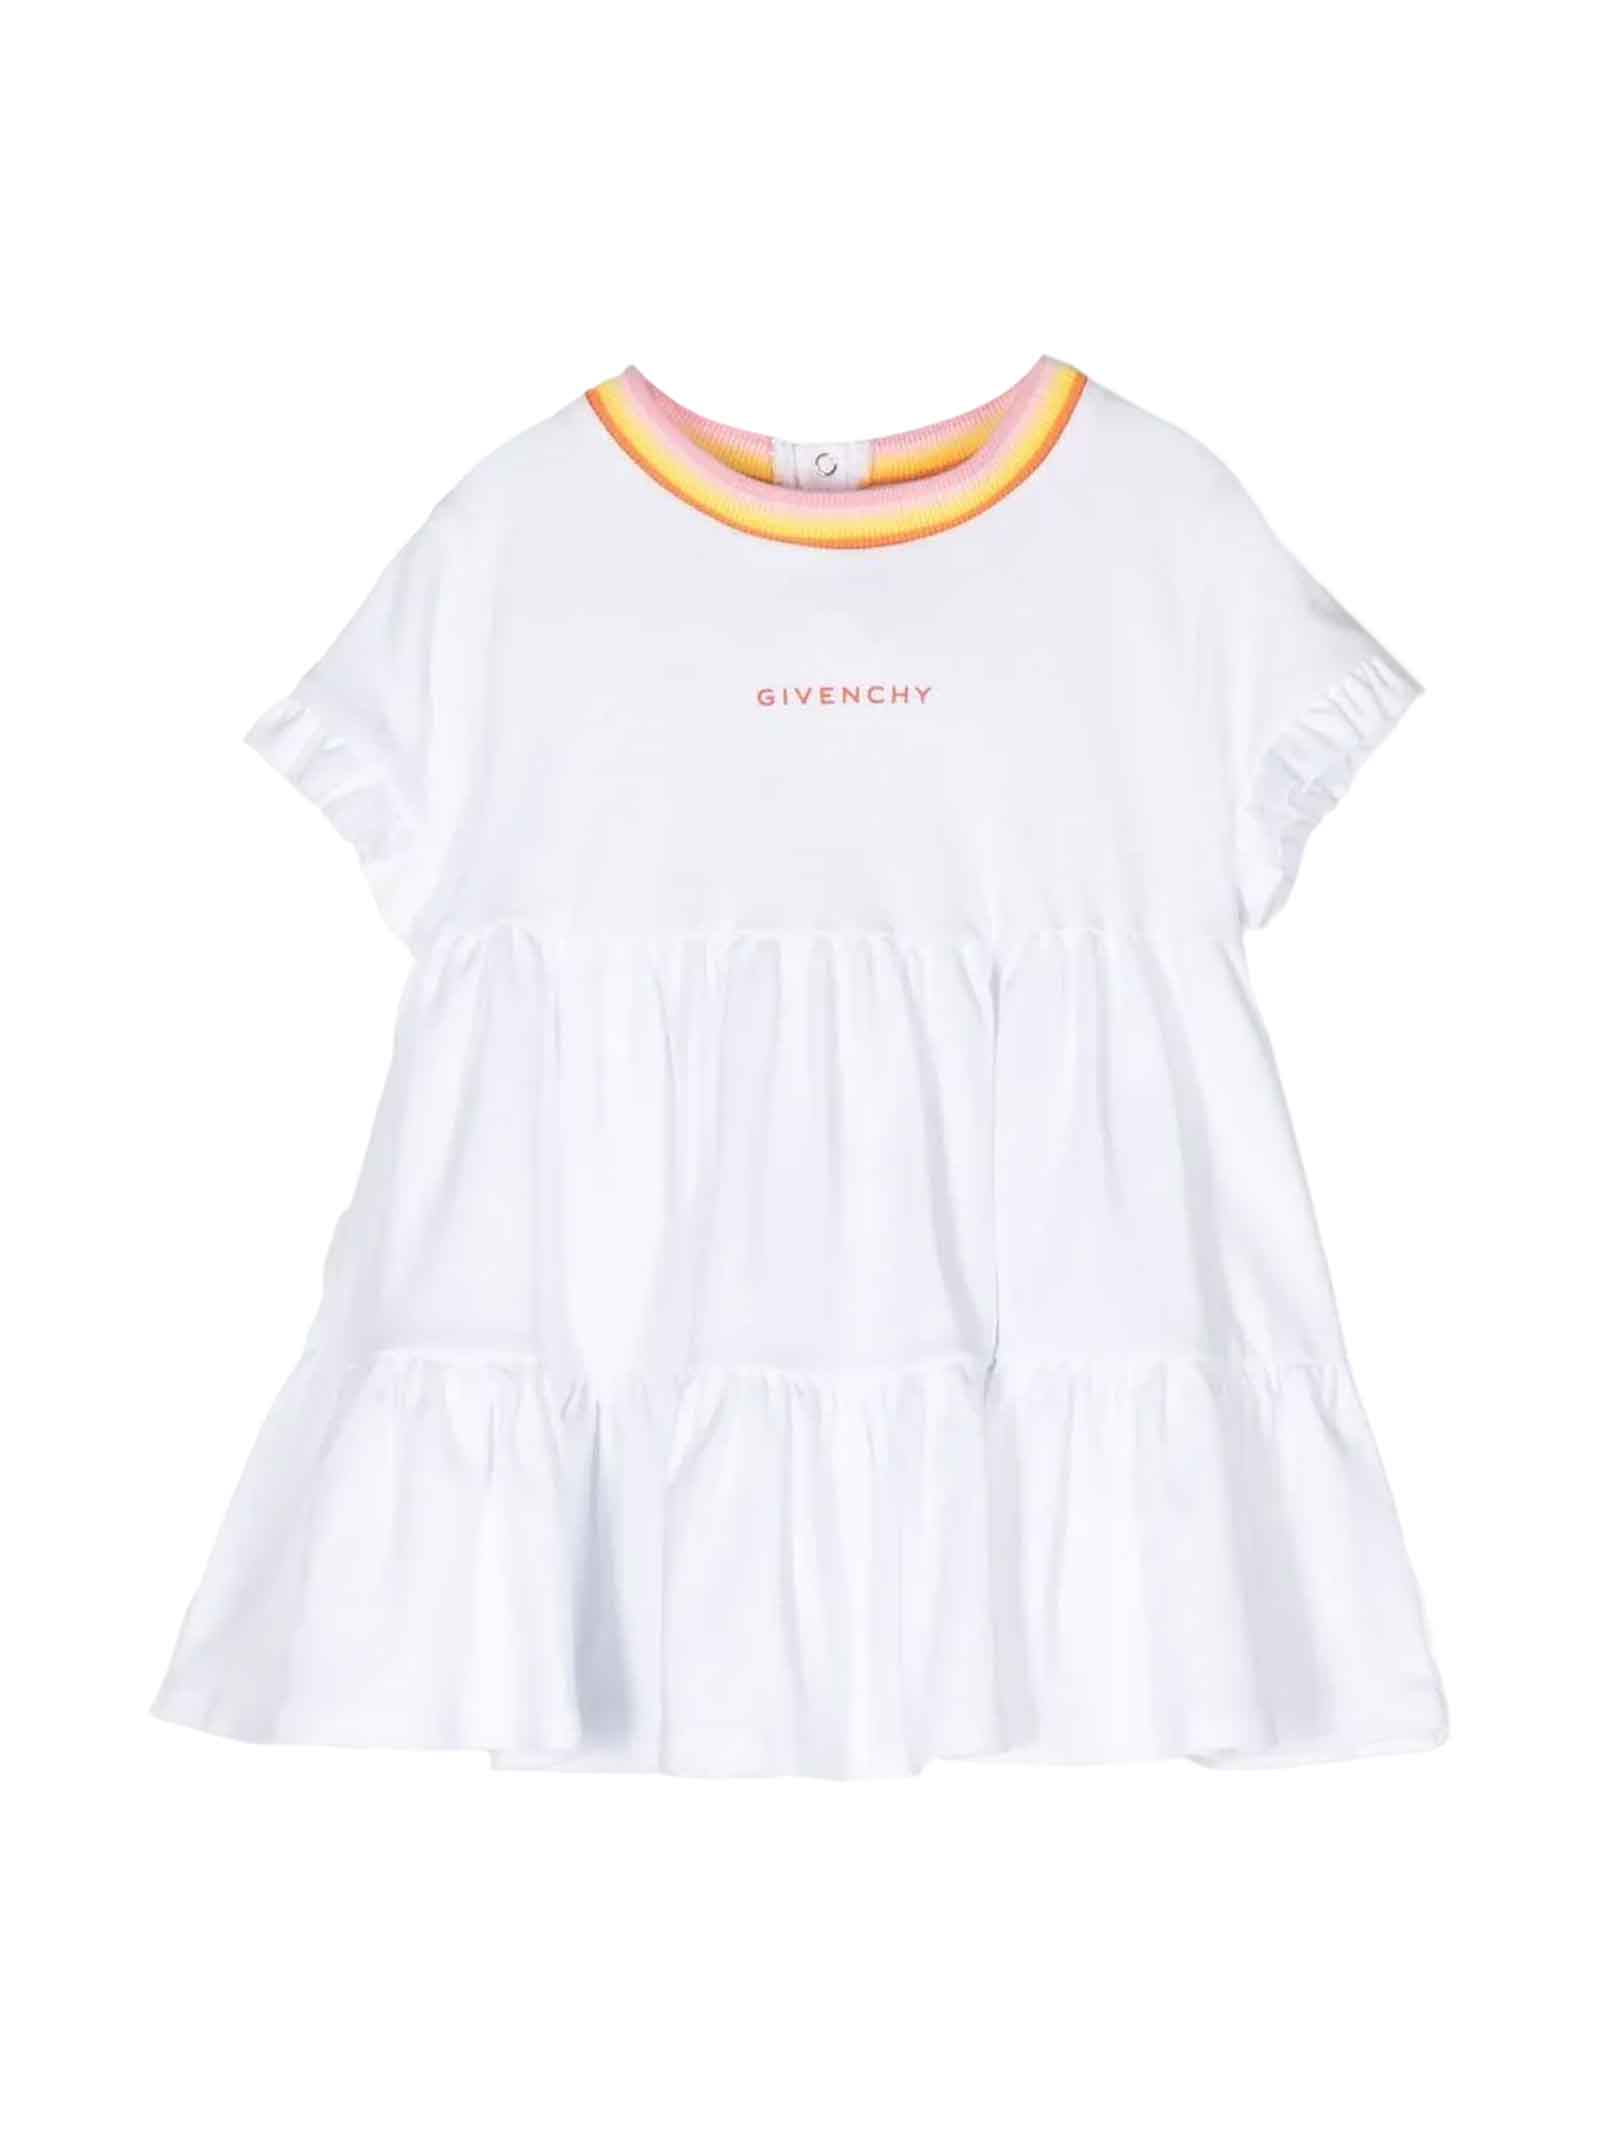 GIVENCHY WHITE DRESS BABY GIRL